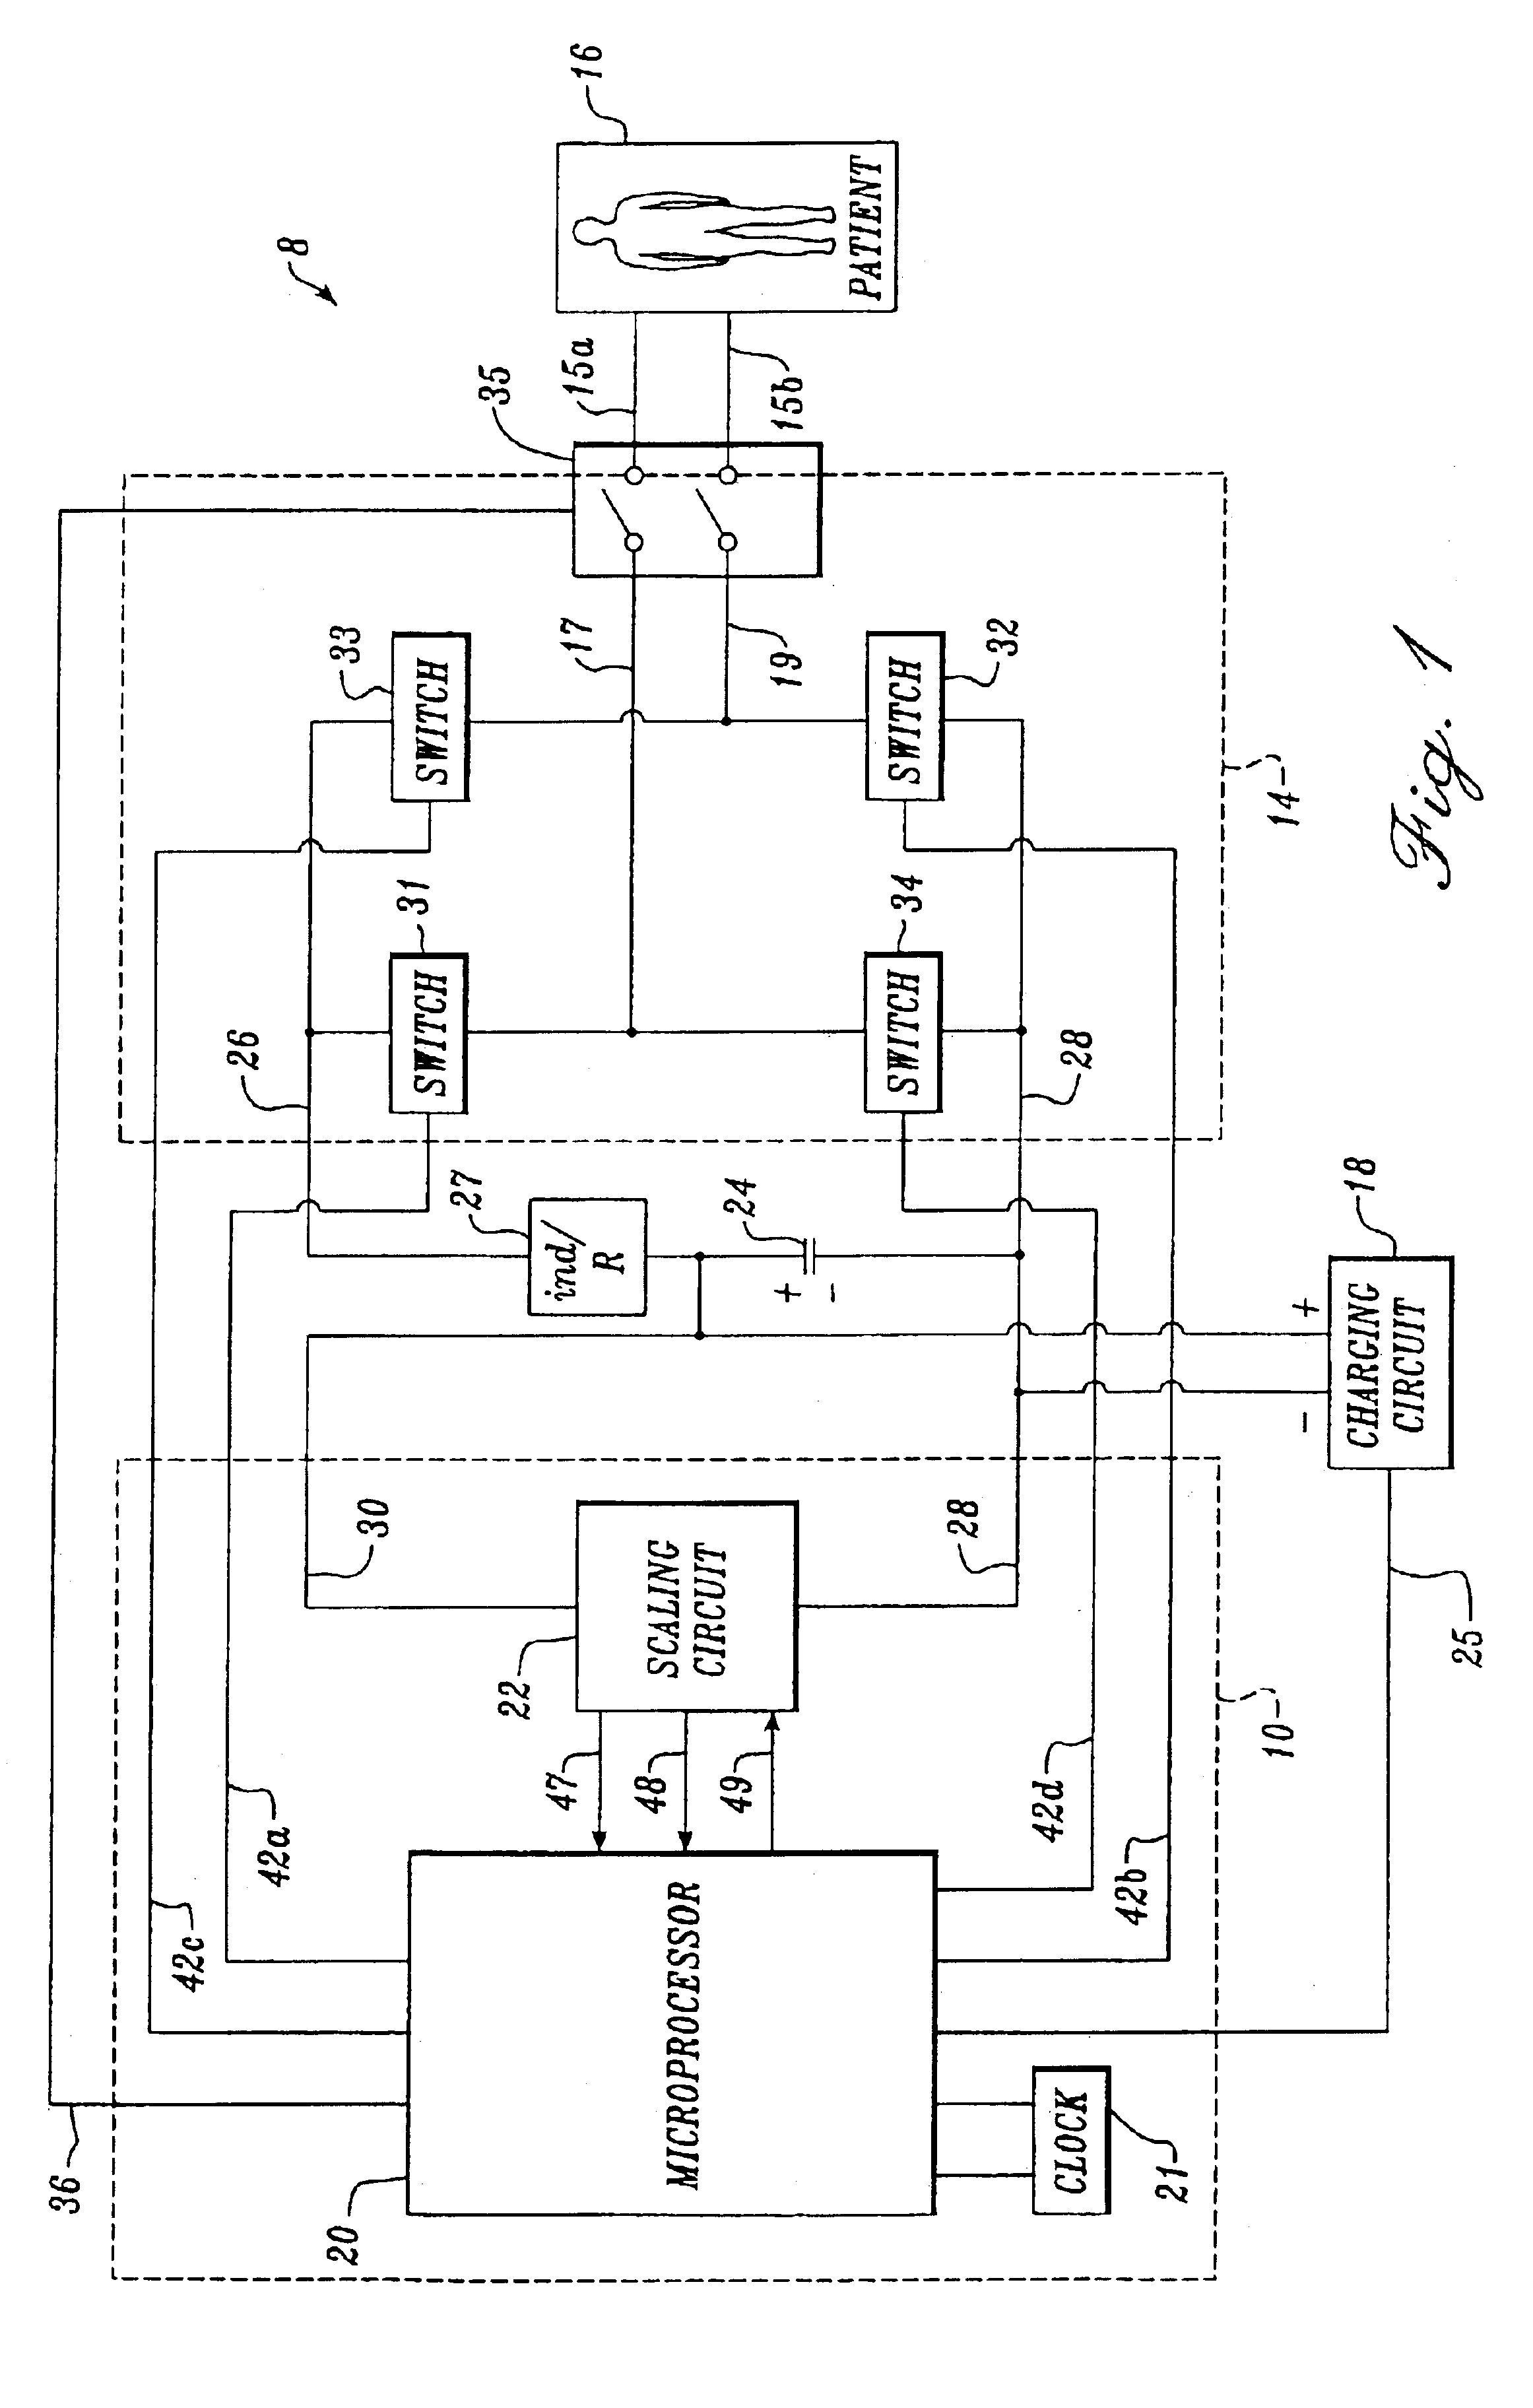 H-bridge circuit for generating a high-energy biphasic waveform in an external defibrillator using single SCR and IGBT switches in an integrated package